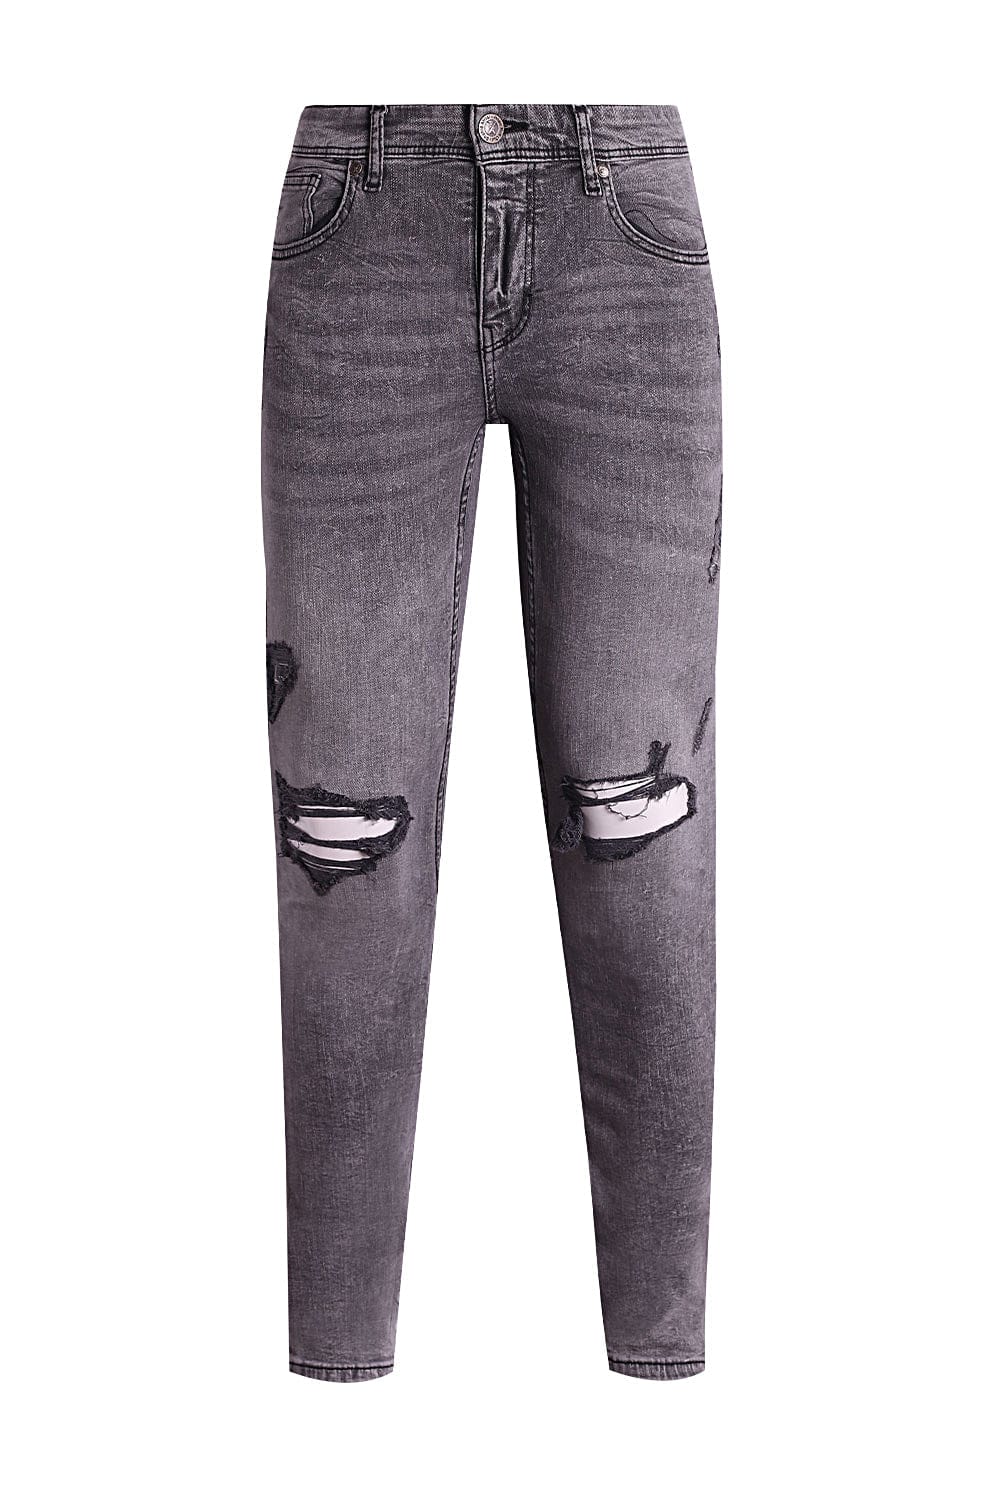 Hope Not Out by Shahid Afridi Men Jeans Premium Stone Wash Slim Fit Ripped Jeans